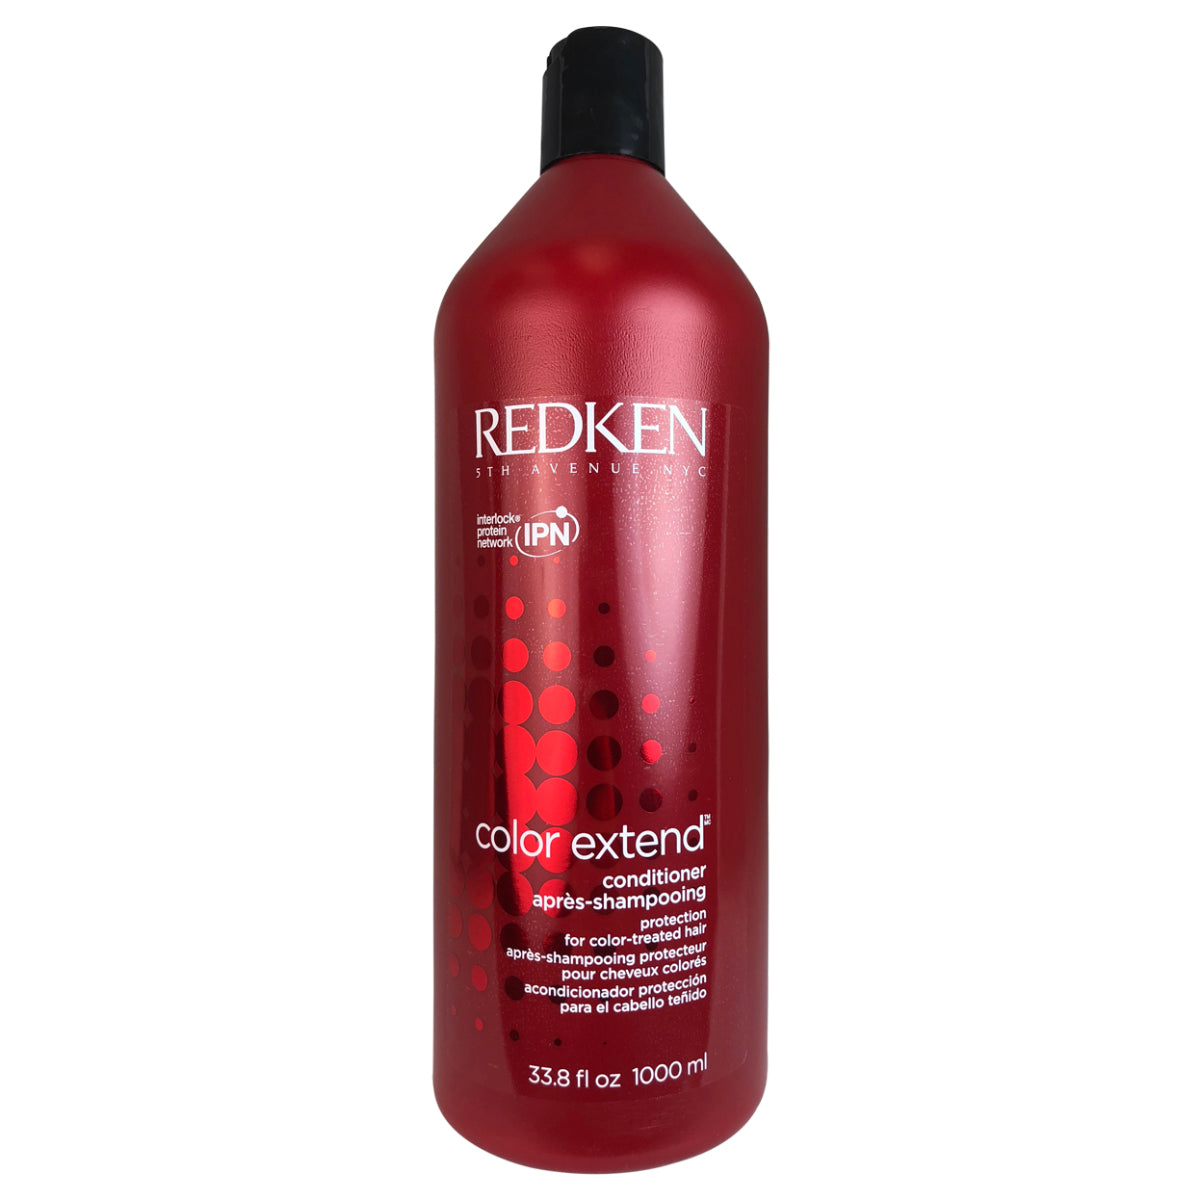 Redken Color Extend Conditioner for Colored Treated Hair 33.8 oz.